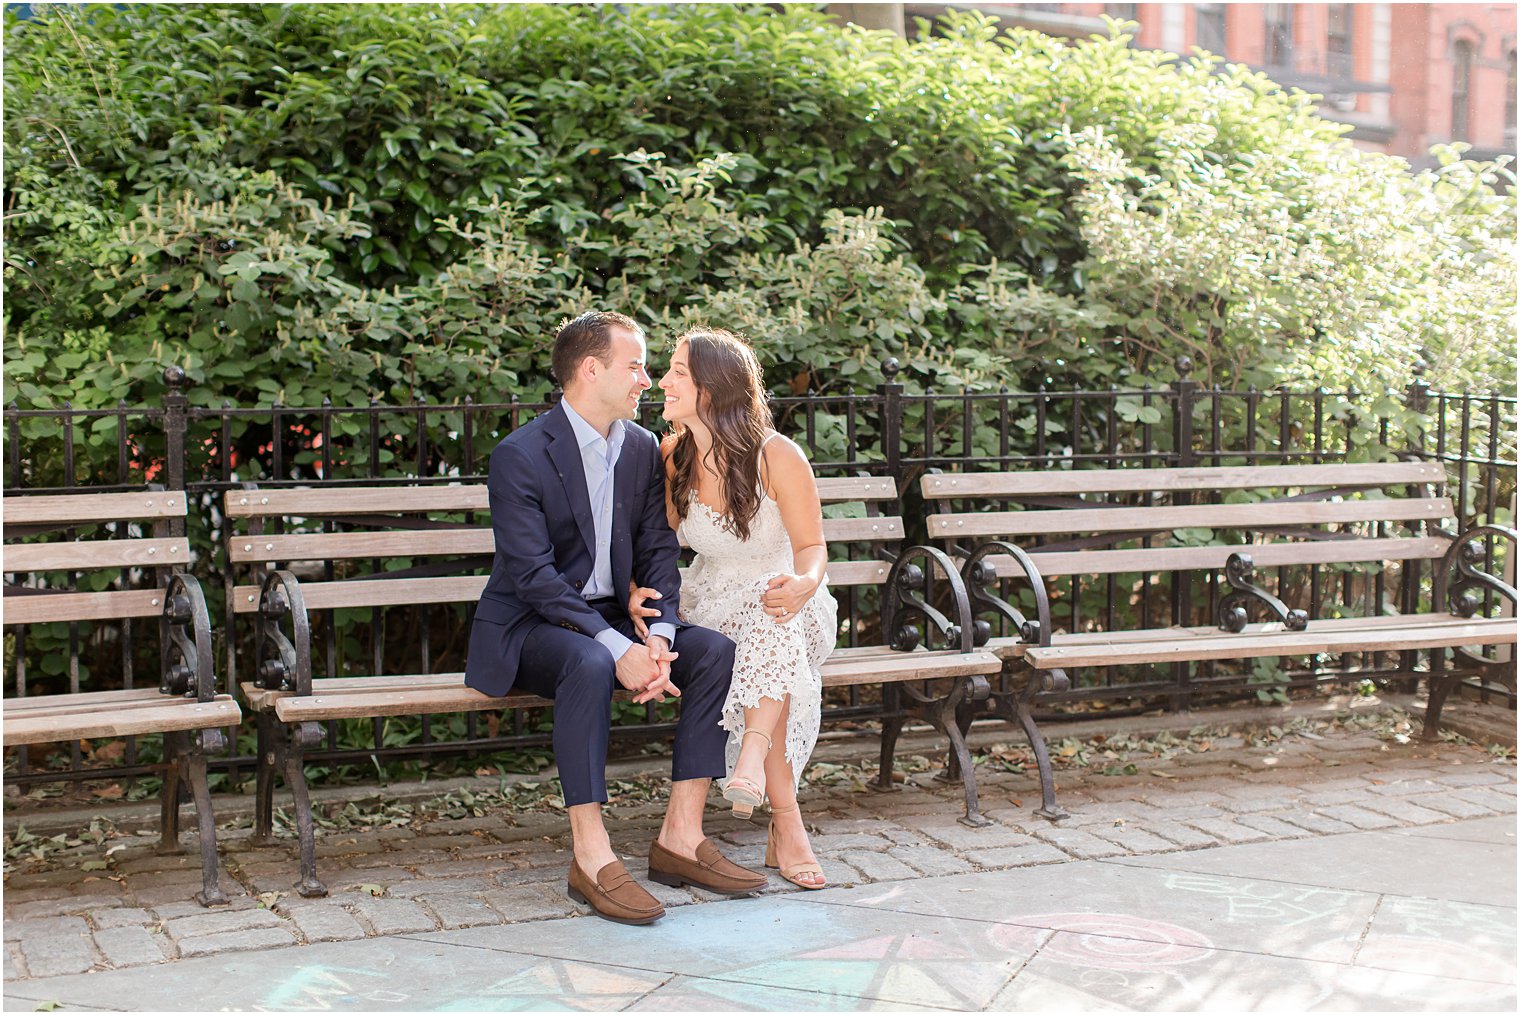 candid photo of couple laughing and sitting on a wooden bench in Duane Park in Tribeca